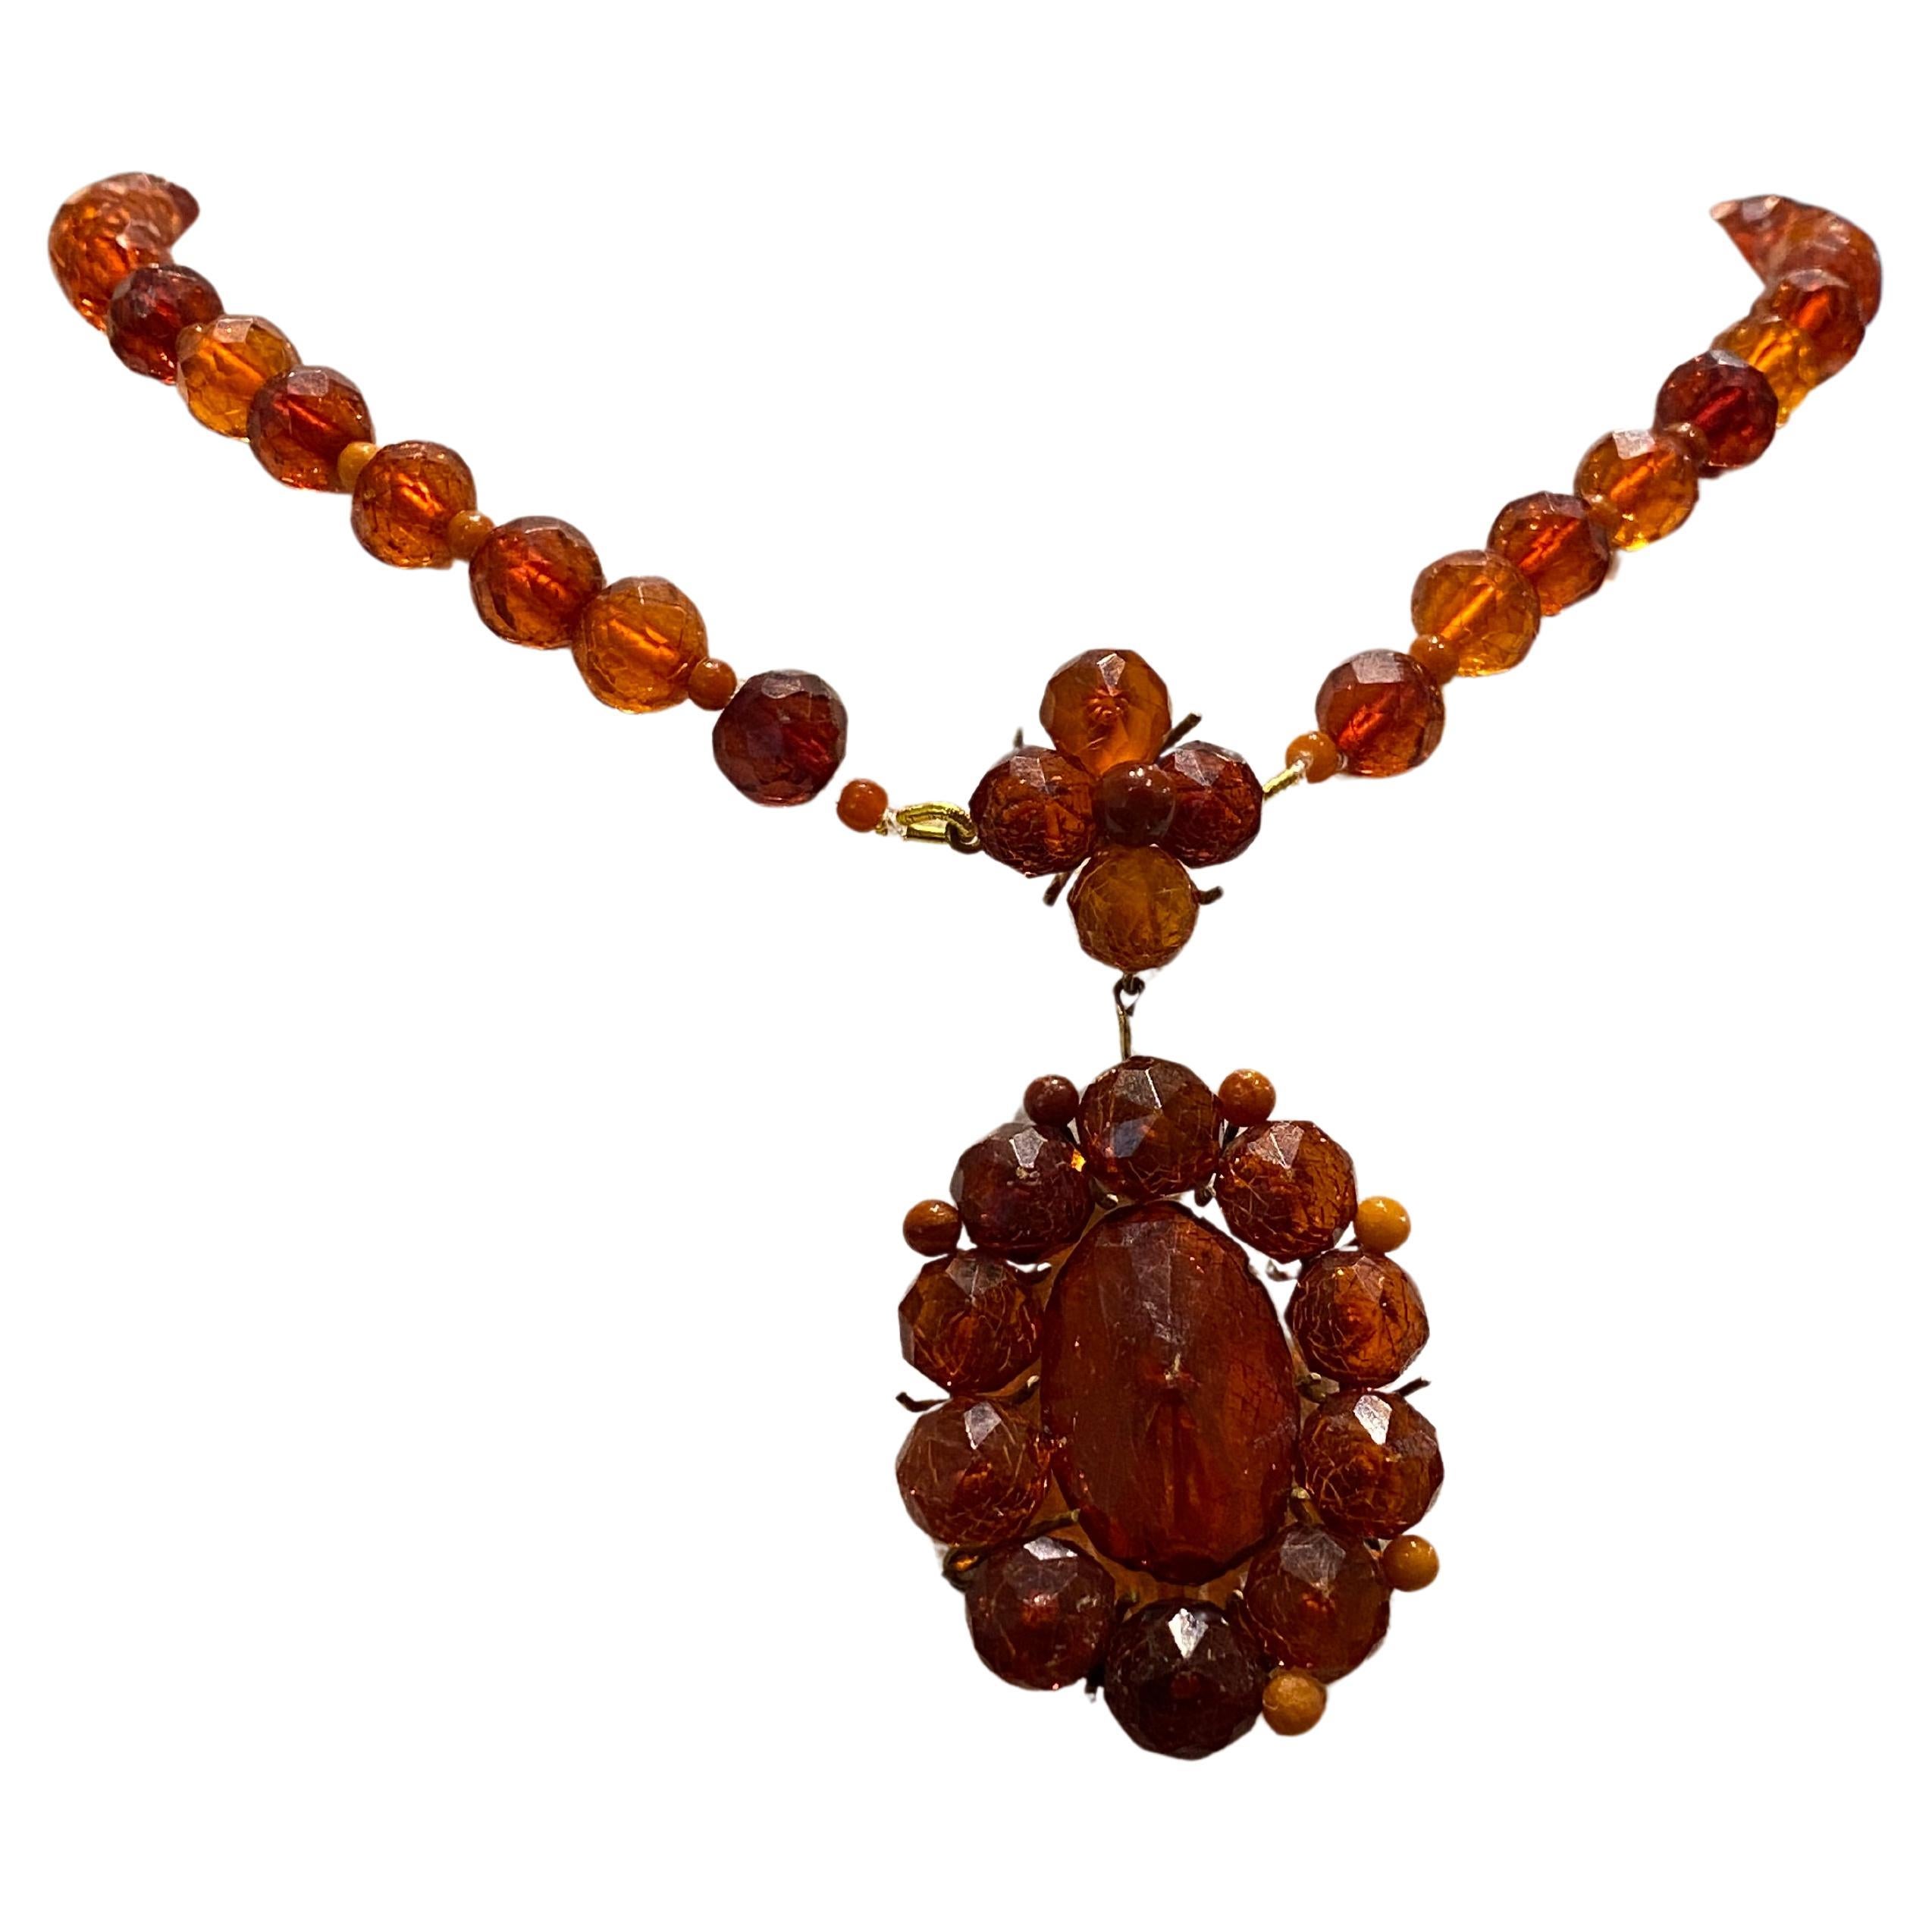 Antique Italian Natural Amber Necklace & Pendant, 9K Gold Clasp, 49cm long. For Sale